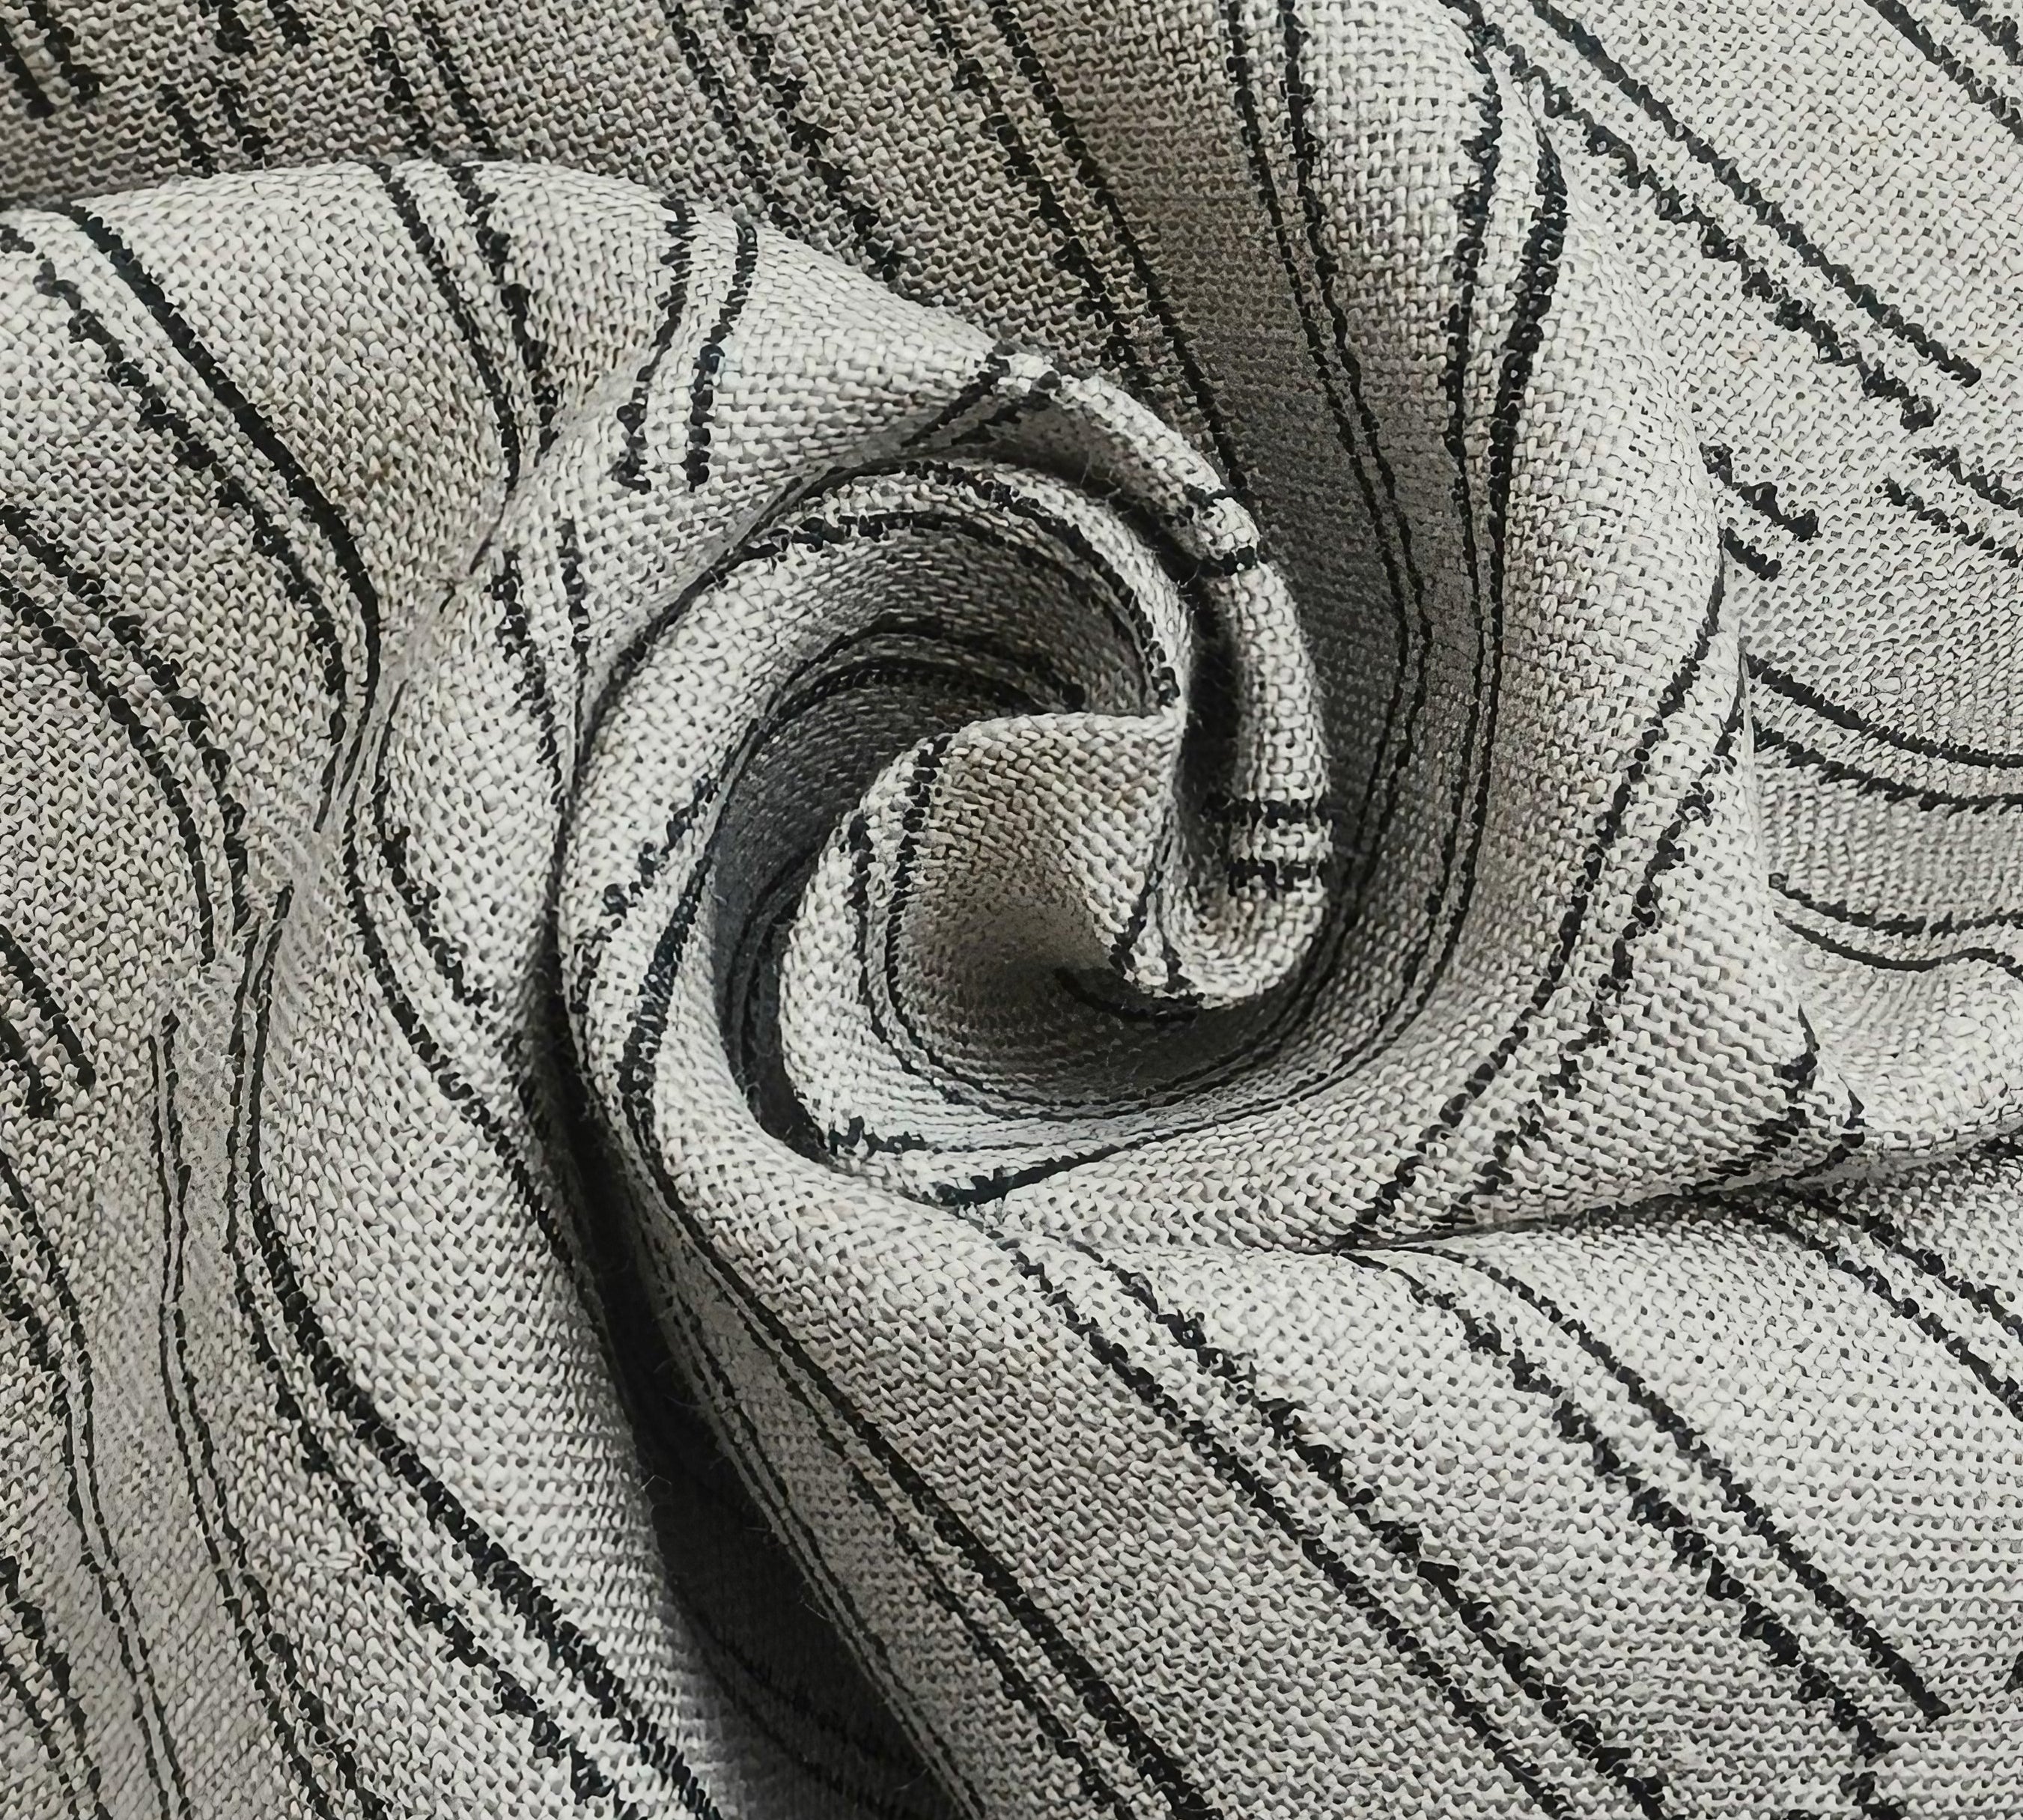 Detailed view of BAIKUNTH's black and white striped textile